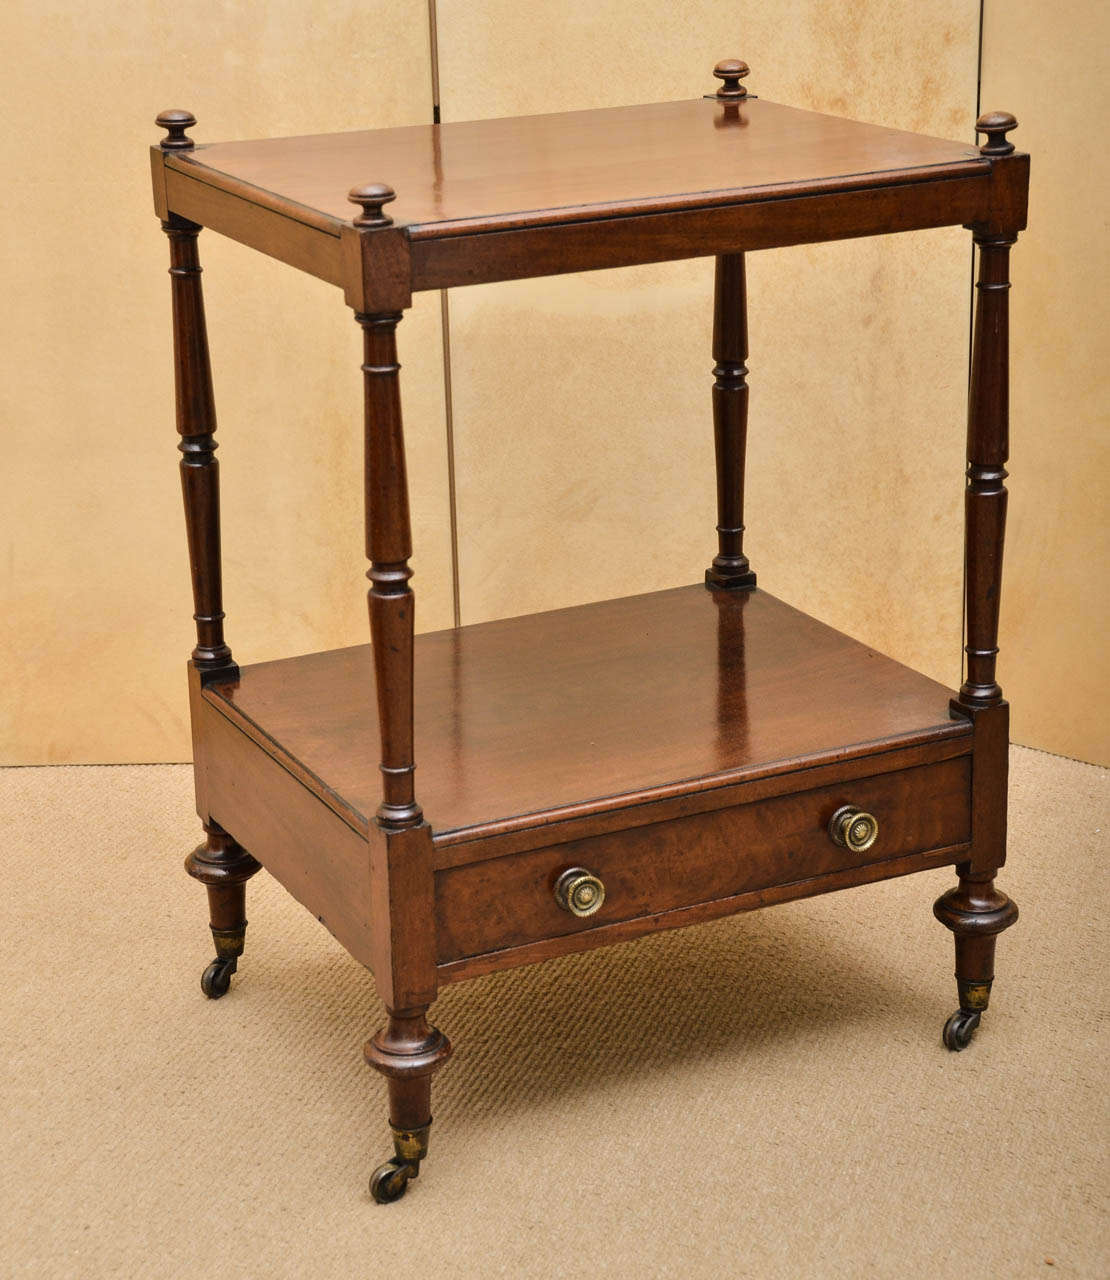 An early 19th Century two-tier side table with drawer and original brass casters.